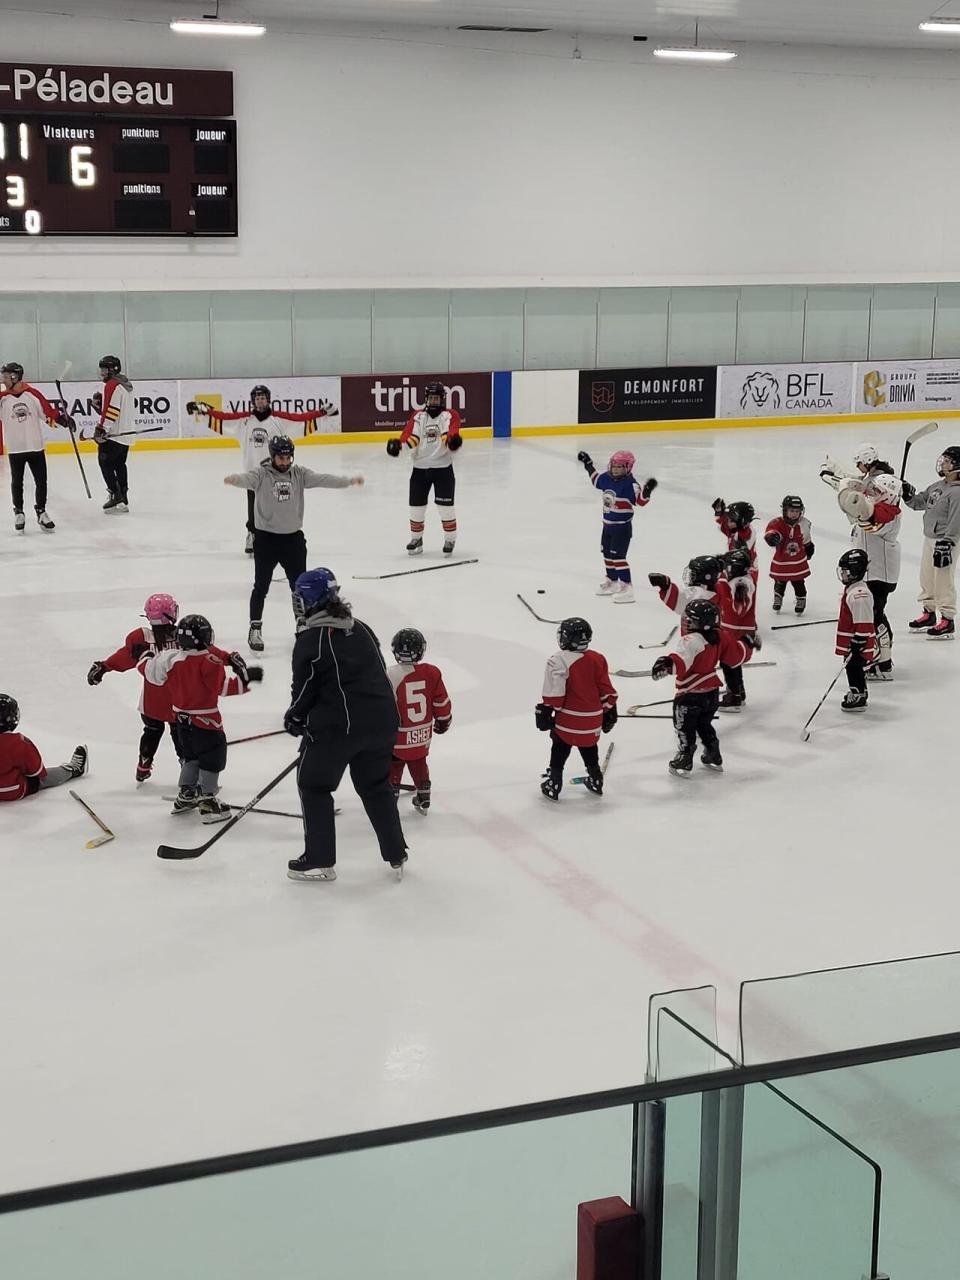 Most hockey associations in the Montreal area don't offer programs that are as inclusive as Avalanche Kidz Hockey.